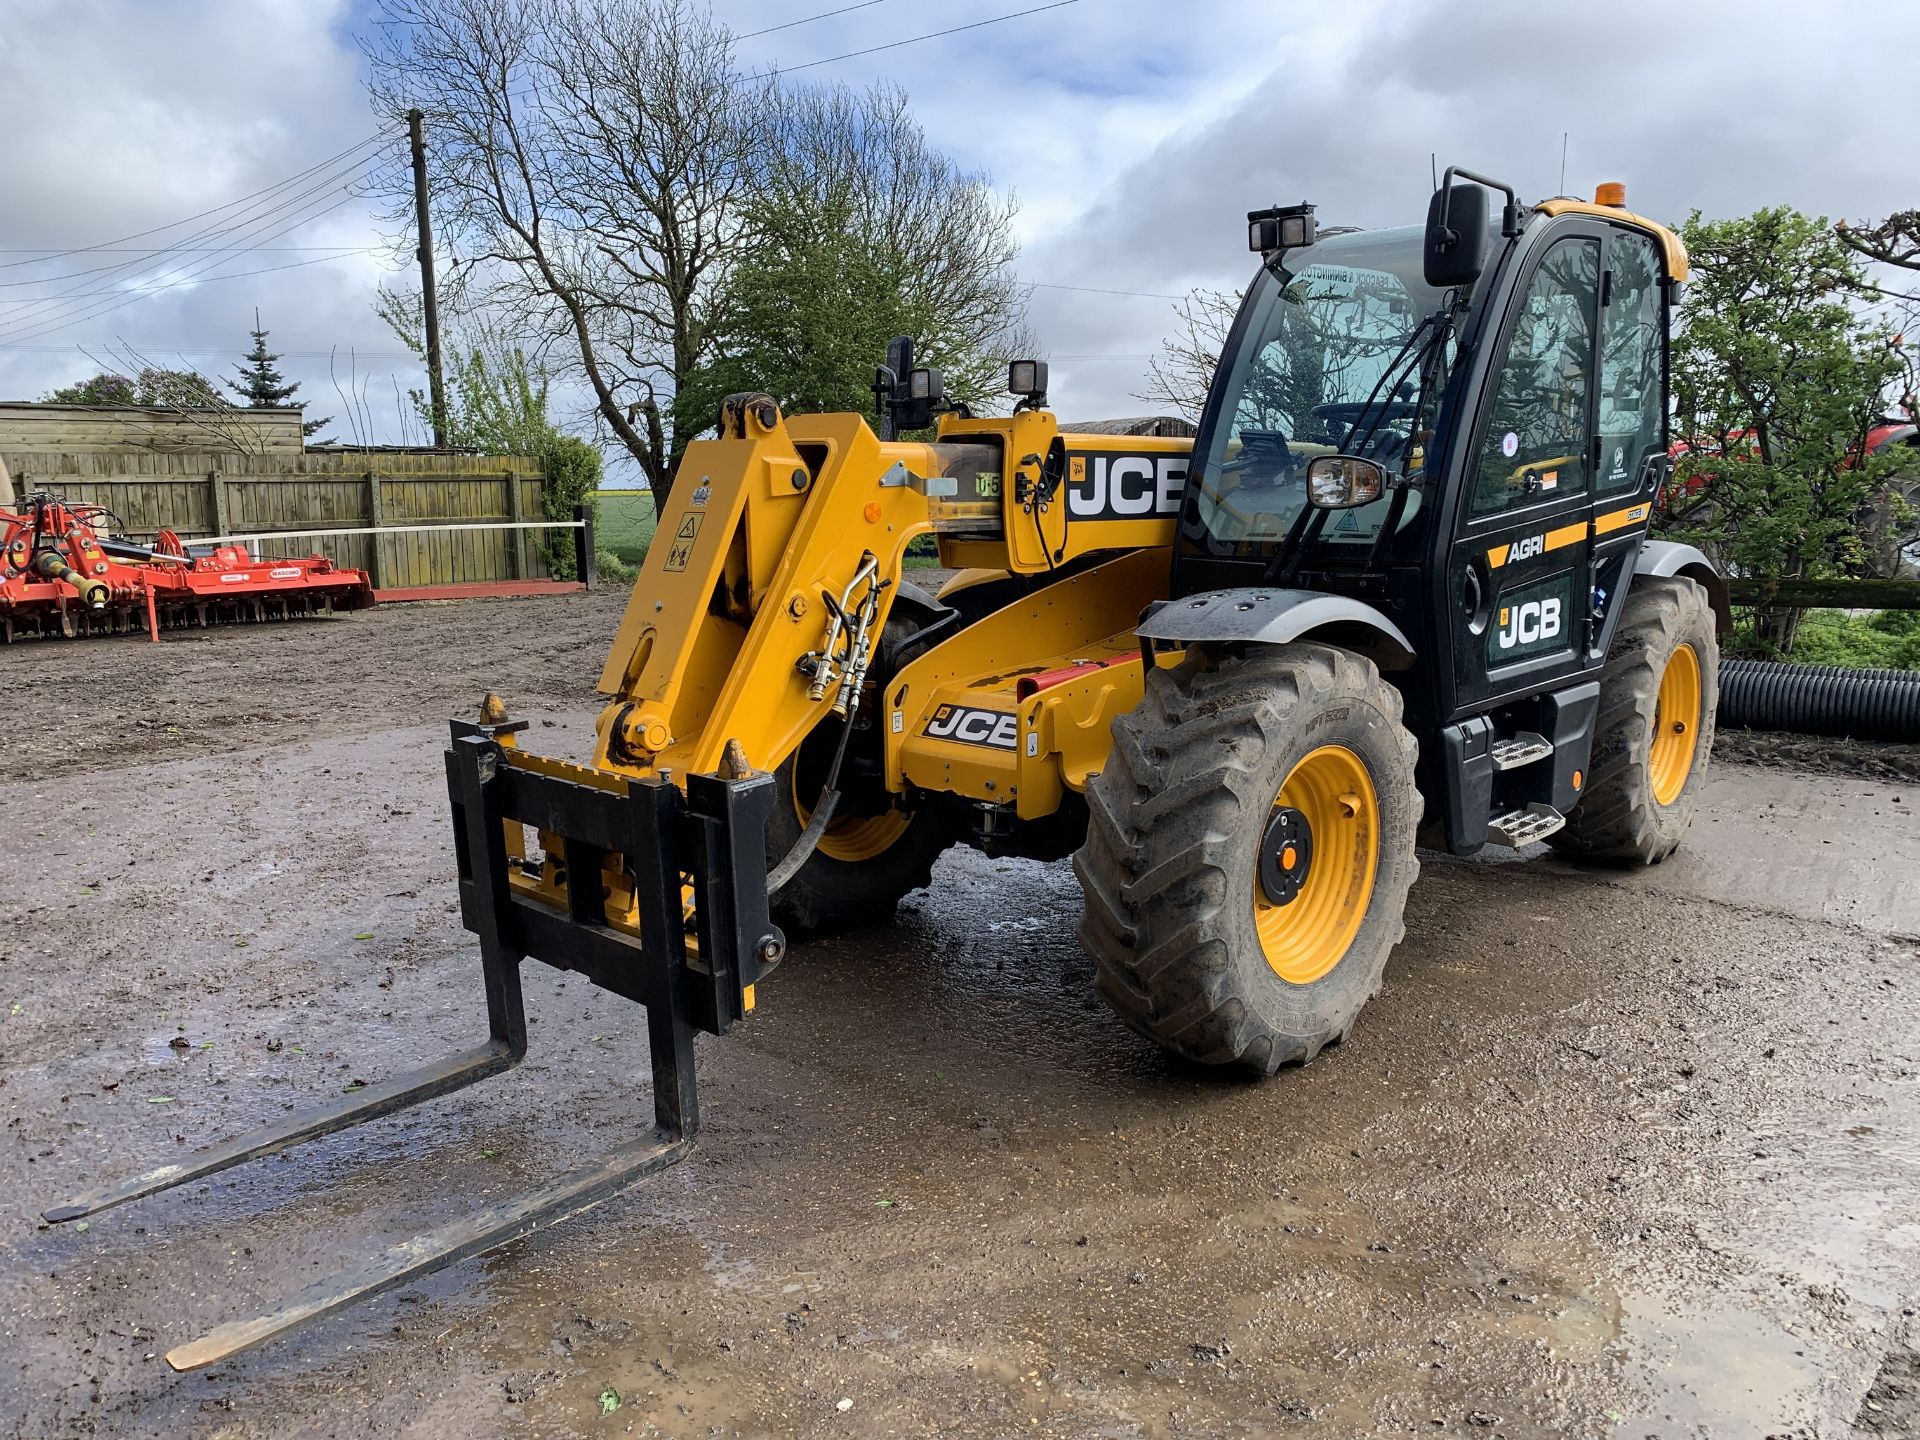 2022 JCB 532-60 telehandler, YX22 VOJ, 760 hours, with pallet tines, pin & cone headstock, pickup